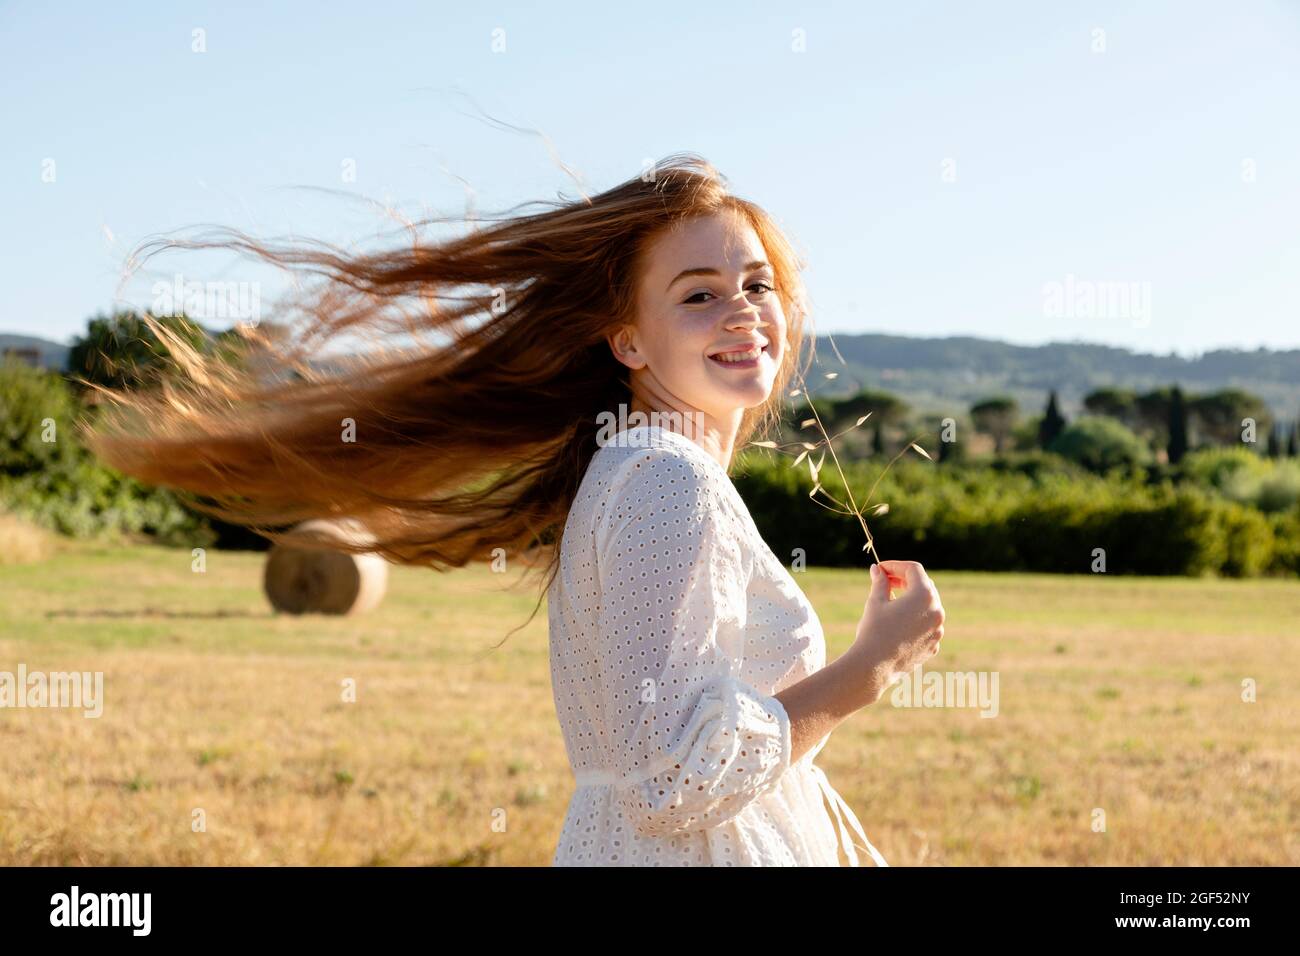 Redhead woman with plant stem tossing hair during sunny day Stock Photo